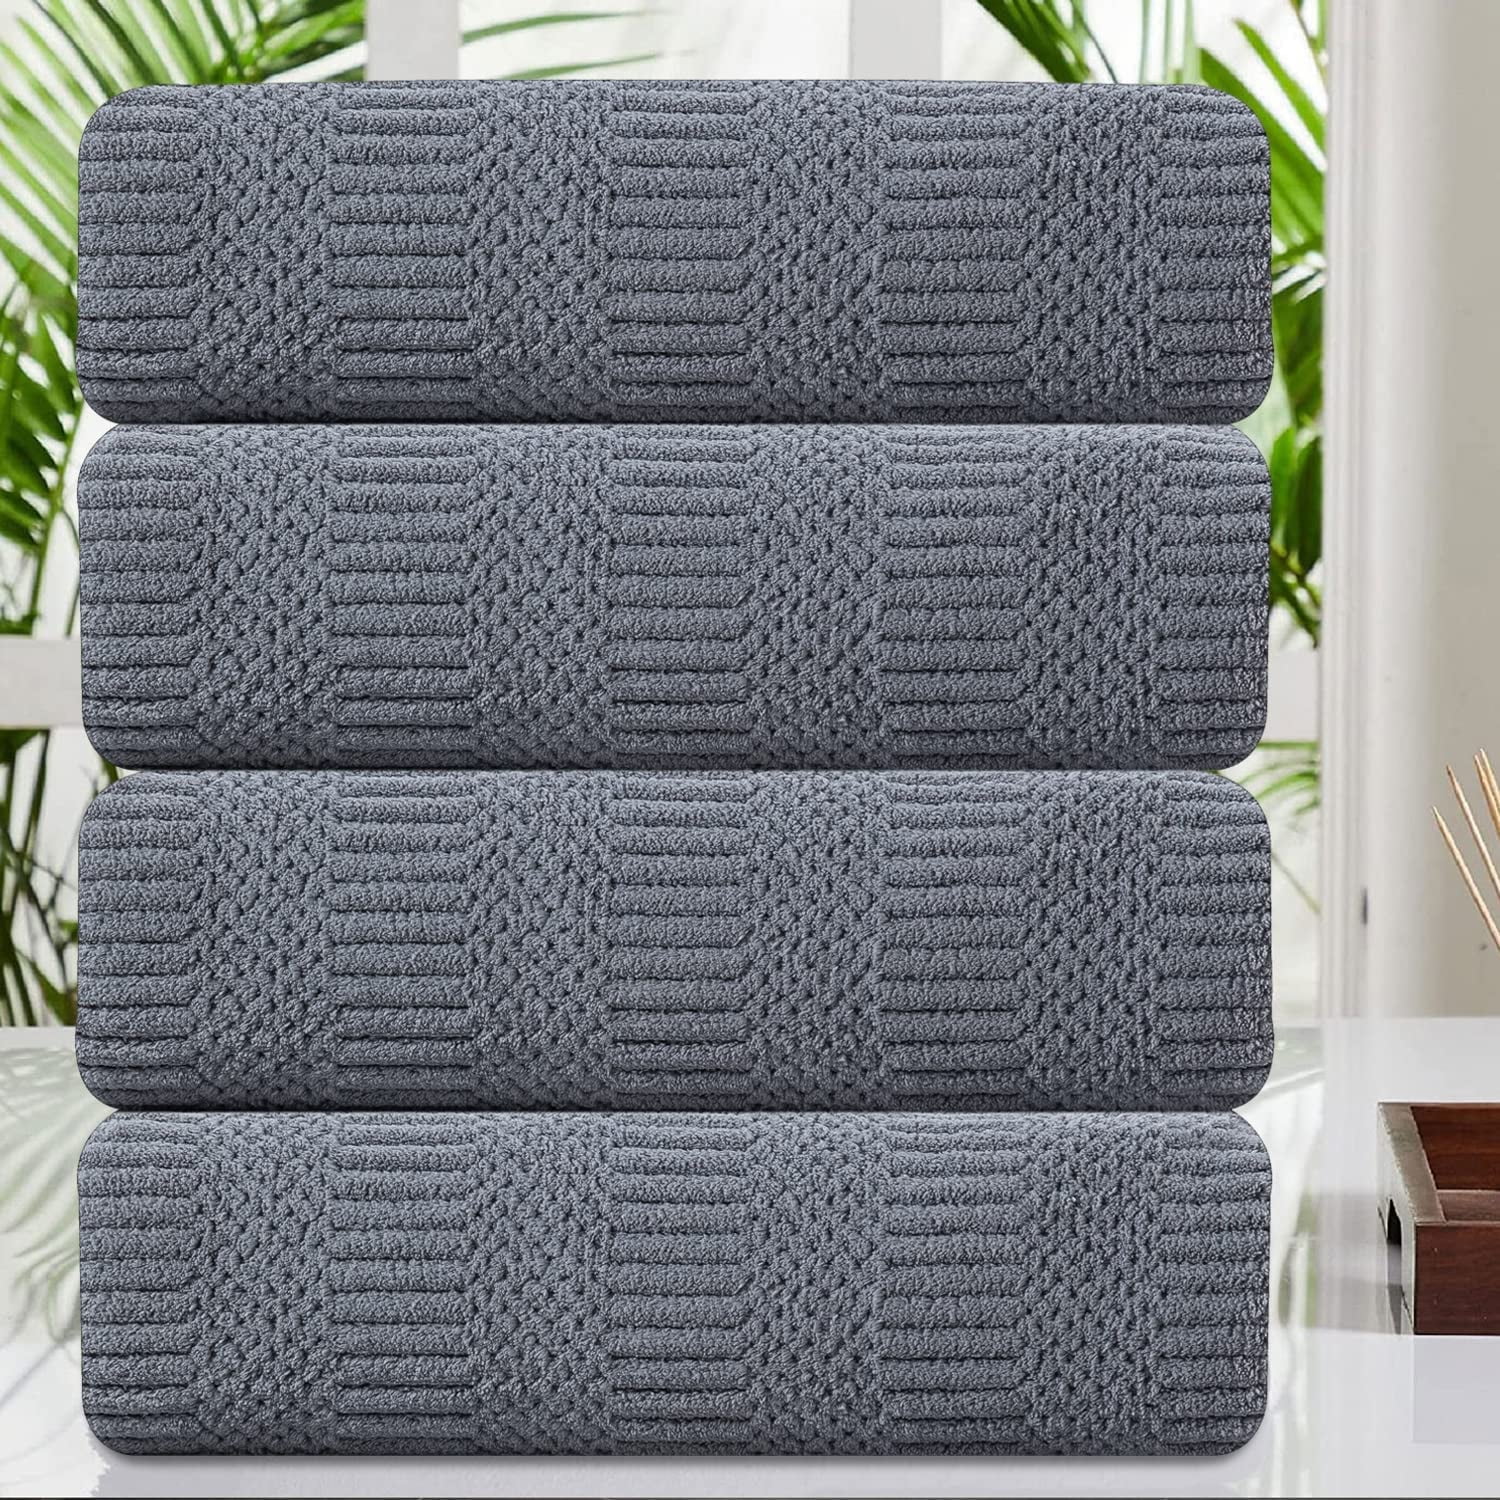 8 Piece Oversized Gray Bath Towel Set-2 Extra Large Bath Towel Sheets,2  Hand Towels,4 Washcloths-600GSM Soft Highly Absorbent Quick Dry Beach Chair